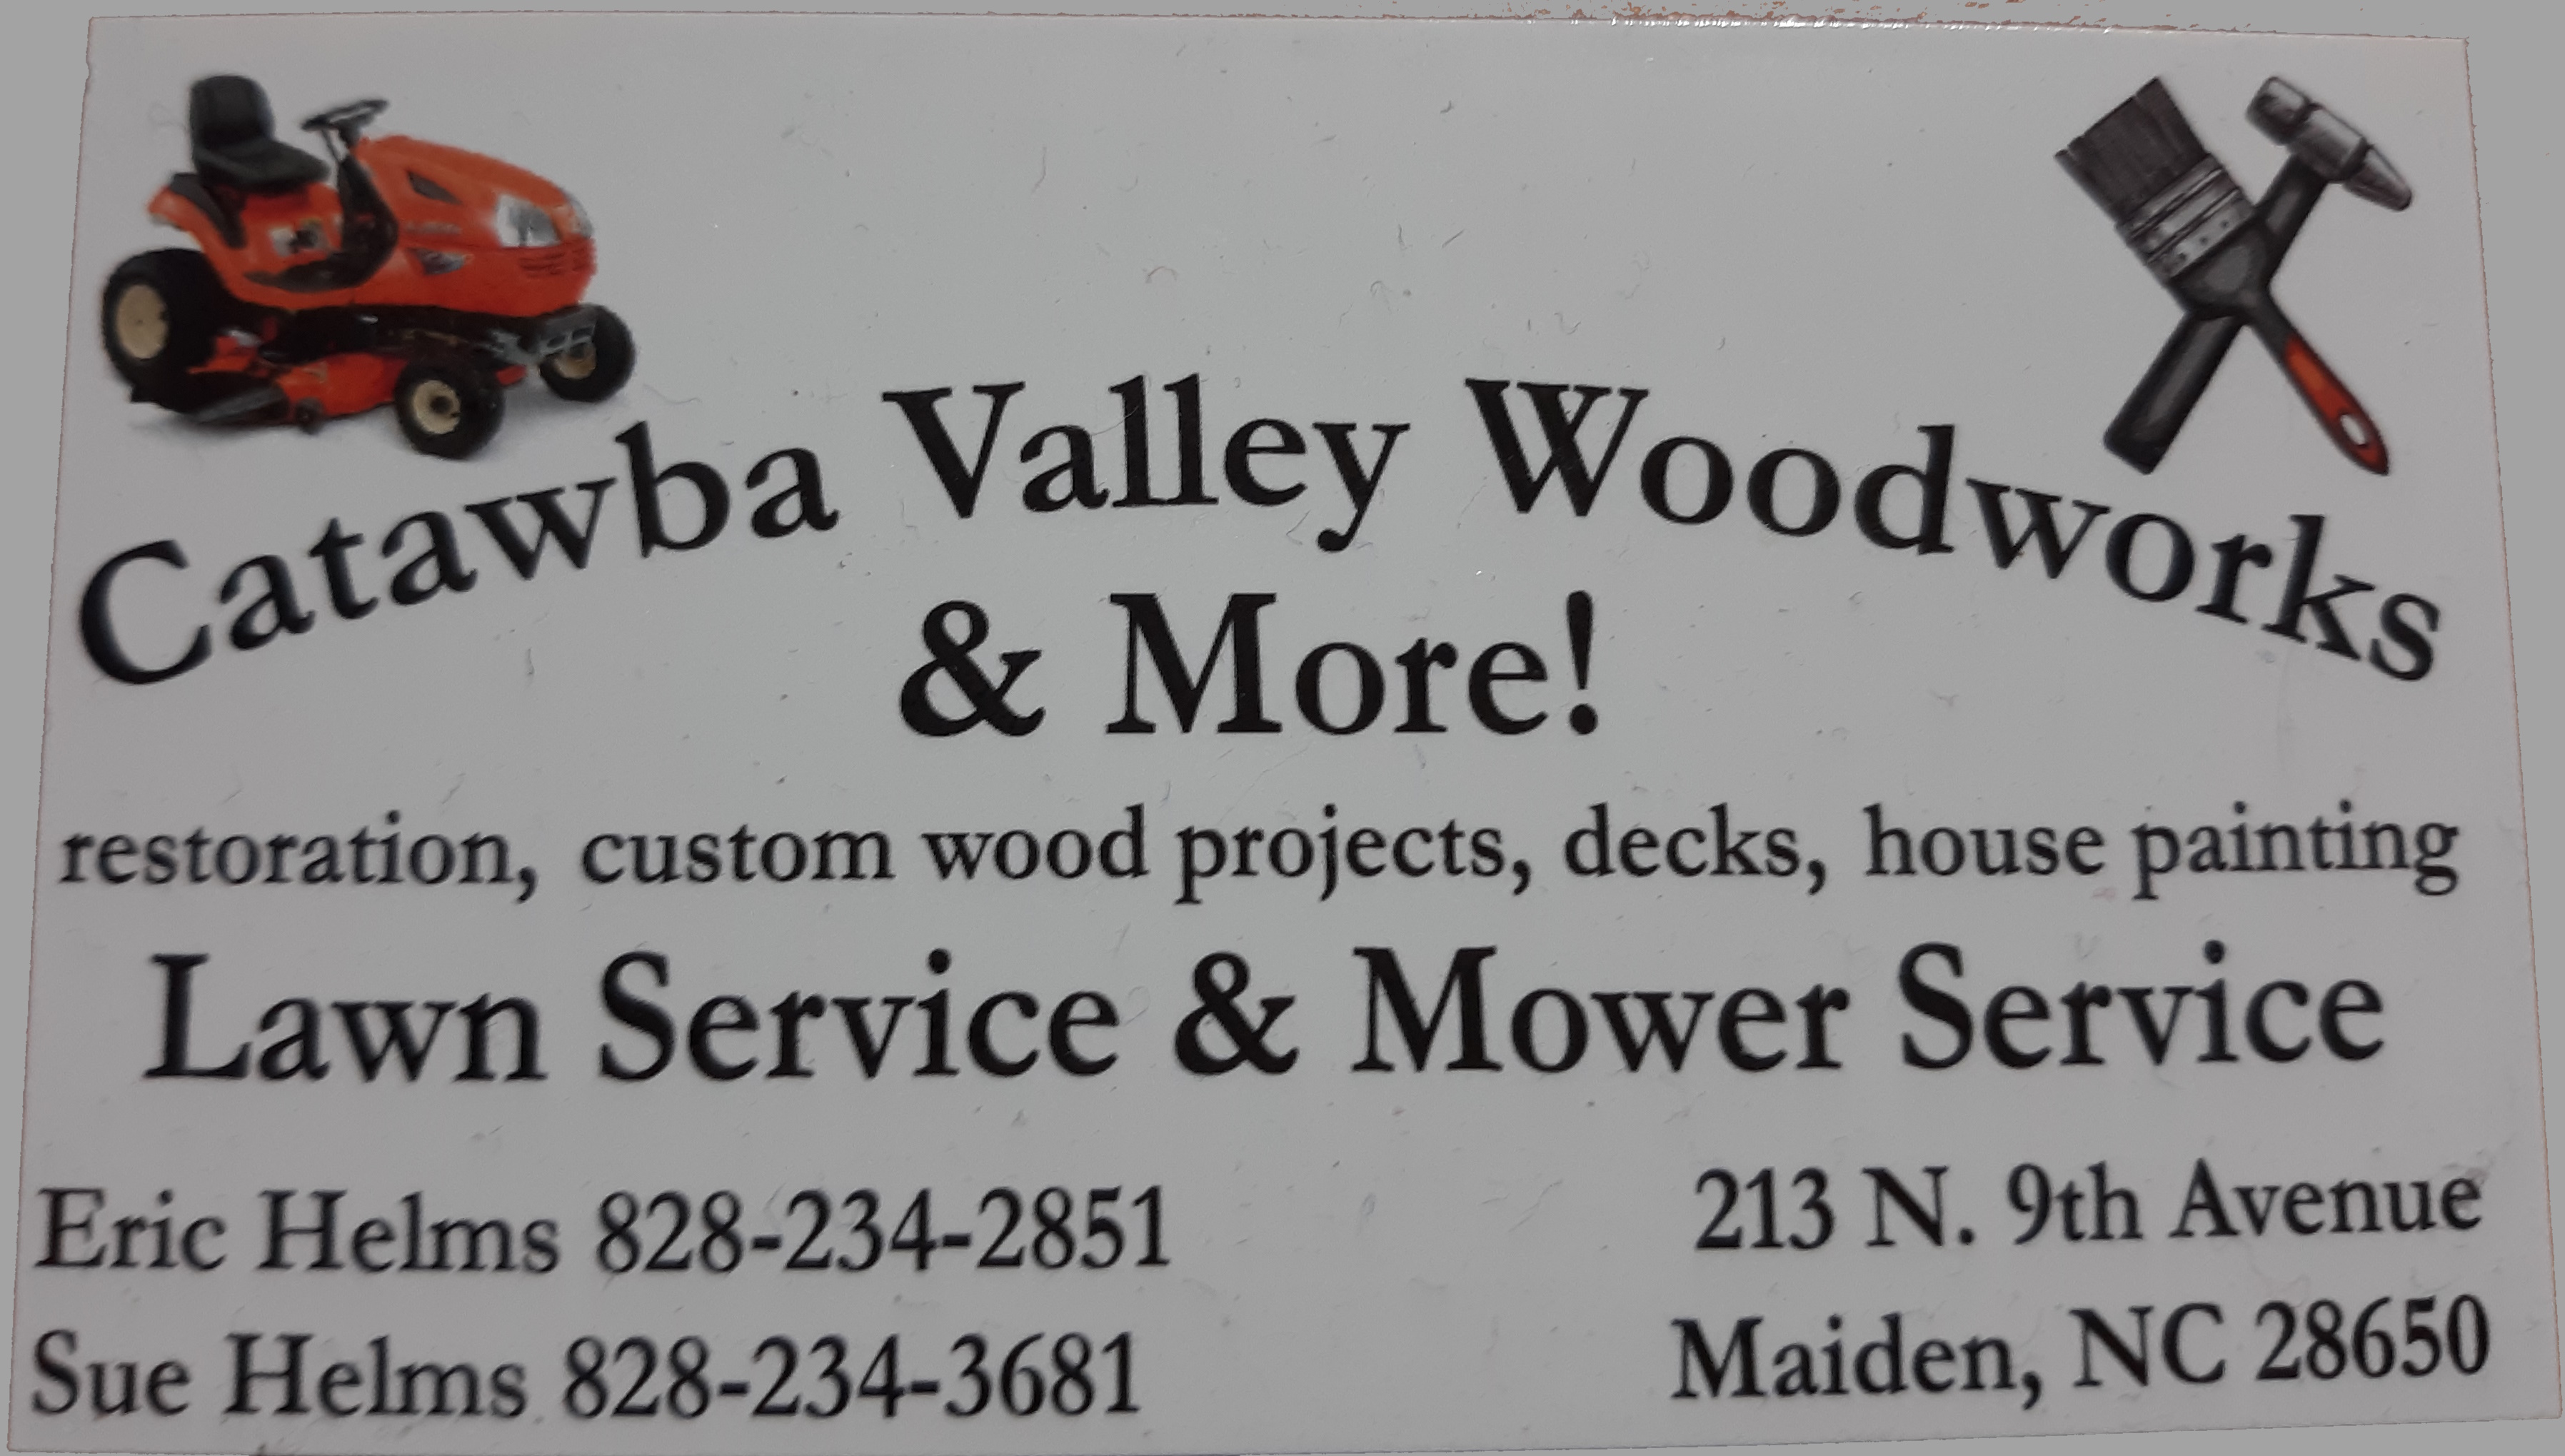 Catawba Valley Woodworks & More